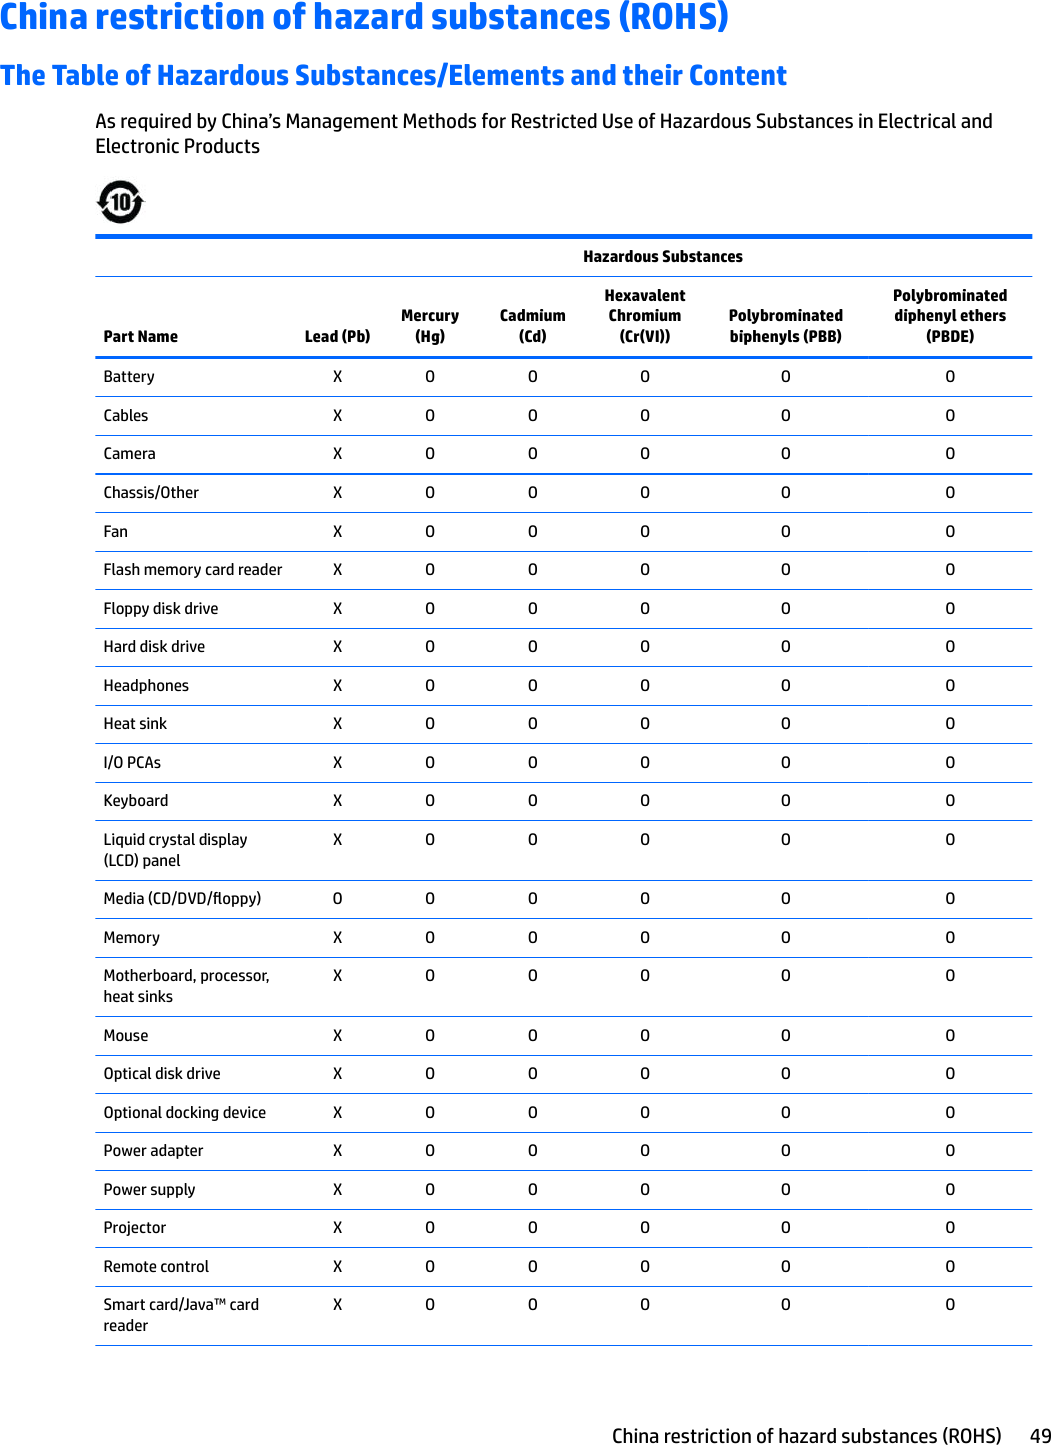 China restriction of hazard substances (ROHS)The Table of Hazardous Substances/Elements and their ContentAs required by China’s Management Methods for Restricted Use of Hazardous Substances in Electrical and Electronic Products  Hazardous SubstancesPart Name Lead (Pb)Mercury (Hg)Cadmium (Cd)Hexavalent Chromium (Cr(VI))Polybrominated biphenyls (PBB)Polybrominated diphenyl ethers (PBDE)Battery X O O O O OCables X O O O O OCamera X O O O O OChassis/Other X O O O O OFan X O O O O OFlash memory card reader X O O O O OFloppy disk drive X O O O O OHard disk drive X O O O O OHeadphones X O O O O OHeat sink X O O O O OI/O PCAs X O O O O OKeyboard X O O O O OLiquid crystal display (LCD) panelX O O O O OMedia (CD/DVD/oppy) O O O O O OMemory X O O O O OMotherboard, processor, heat sinksX O O O O OMouse X O O O O OOptical disk drive X O O O O OOptional docking device X O O O O OPower adapter X O O O O OPower supply X O O O O OProjector X O O O O ORemote control X O O O O OSmart card/Java™ card readerX O O O O OChina restriction of hazard substances (ROHS) 49